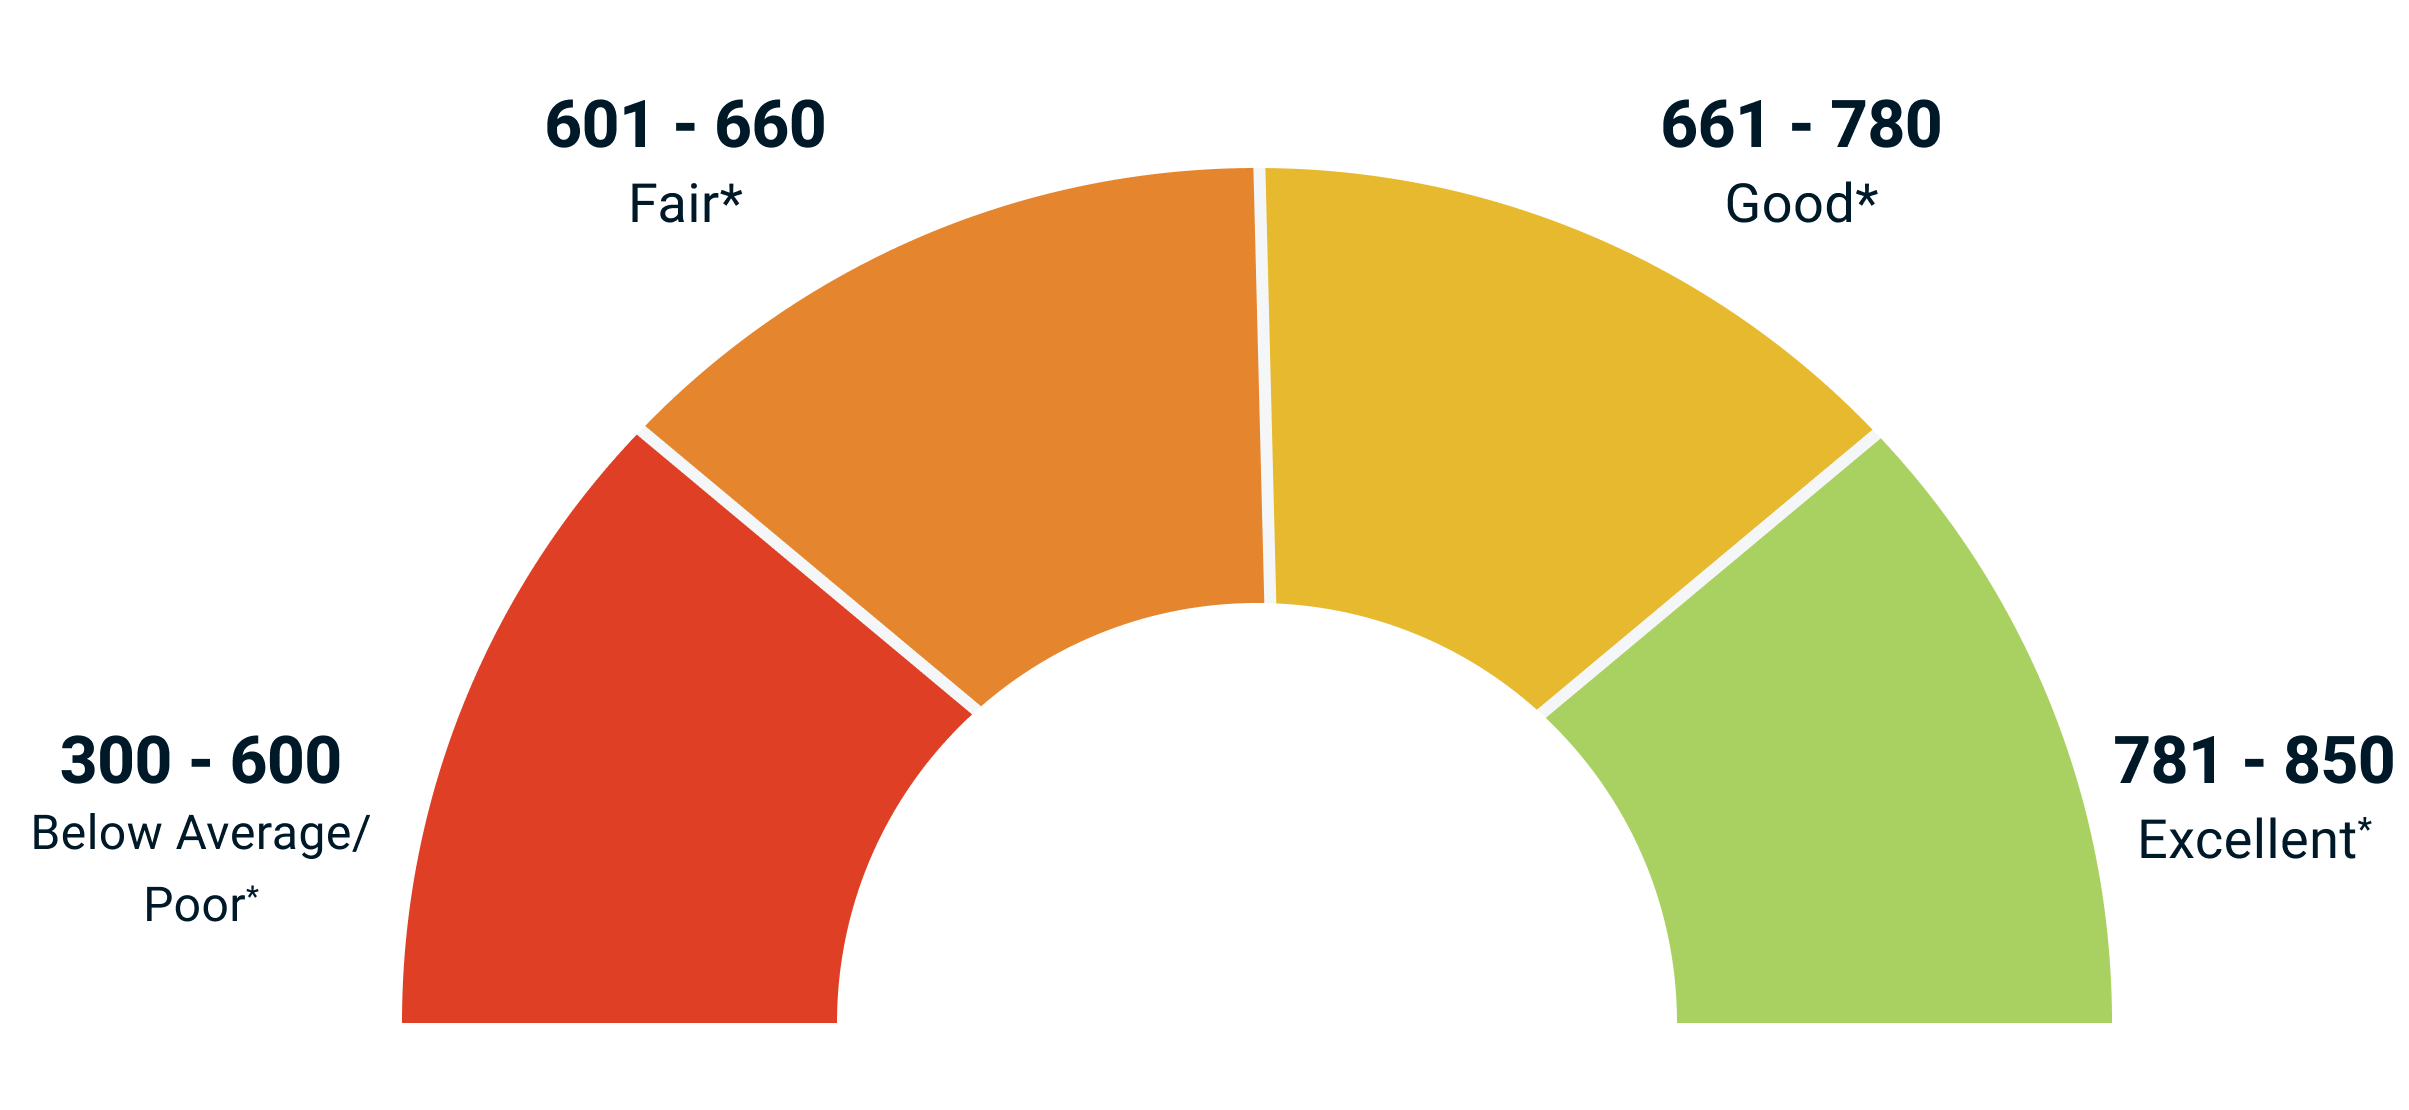 A graph of the TransUnion credit score range from 300-850, 300-600 is considered below average or poor credit and a red color, 601-660 is fair and orange, 661-780 is considered good credit and shown as yellow, 781-850 is excellent and shown in green.